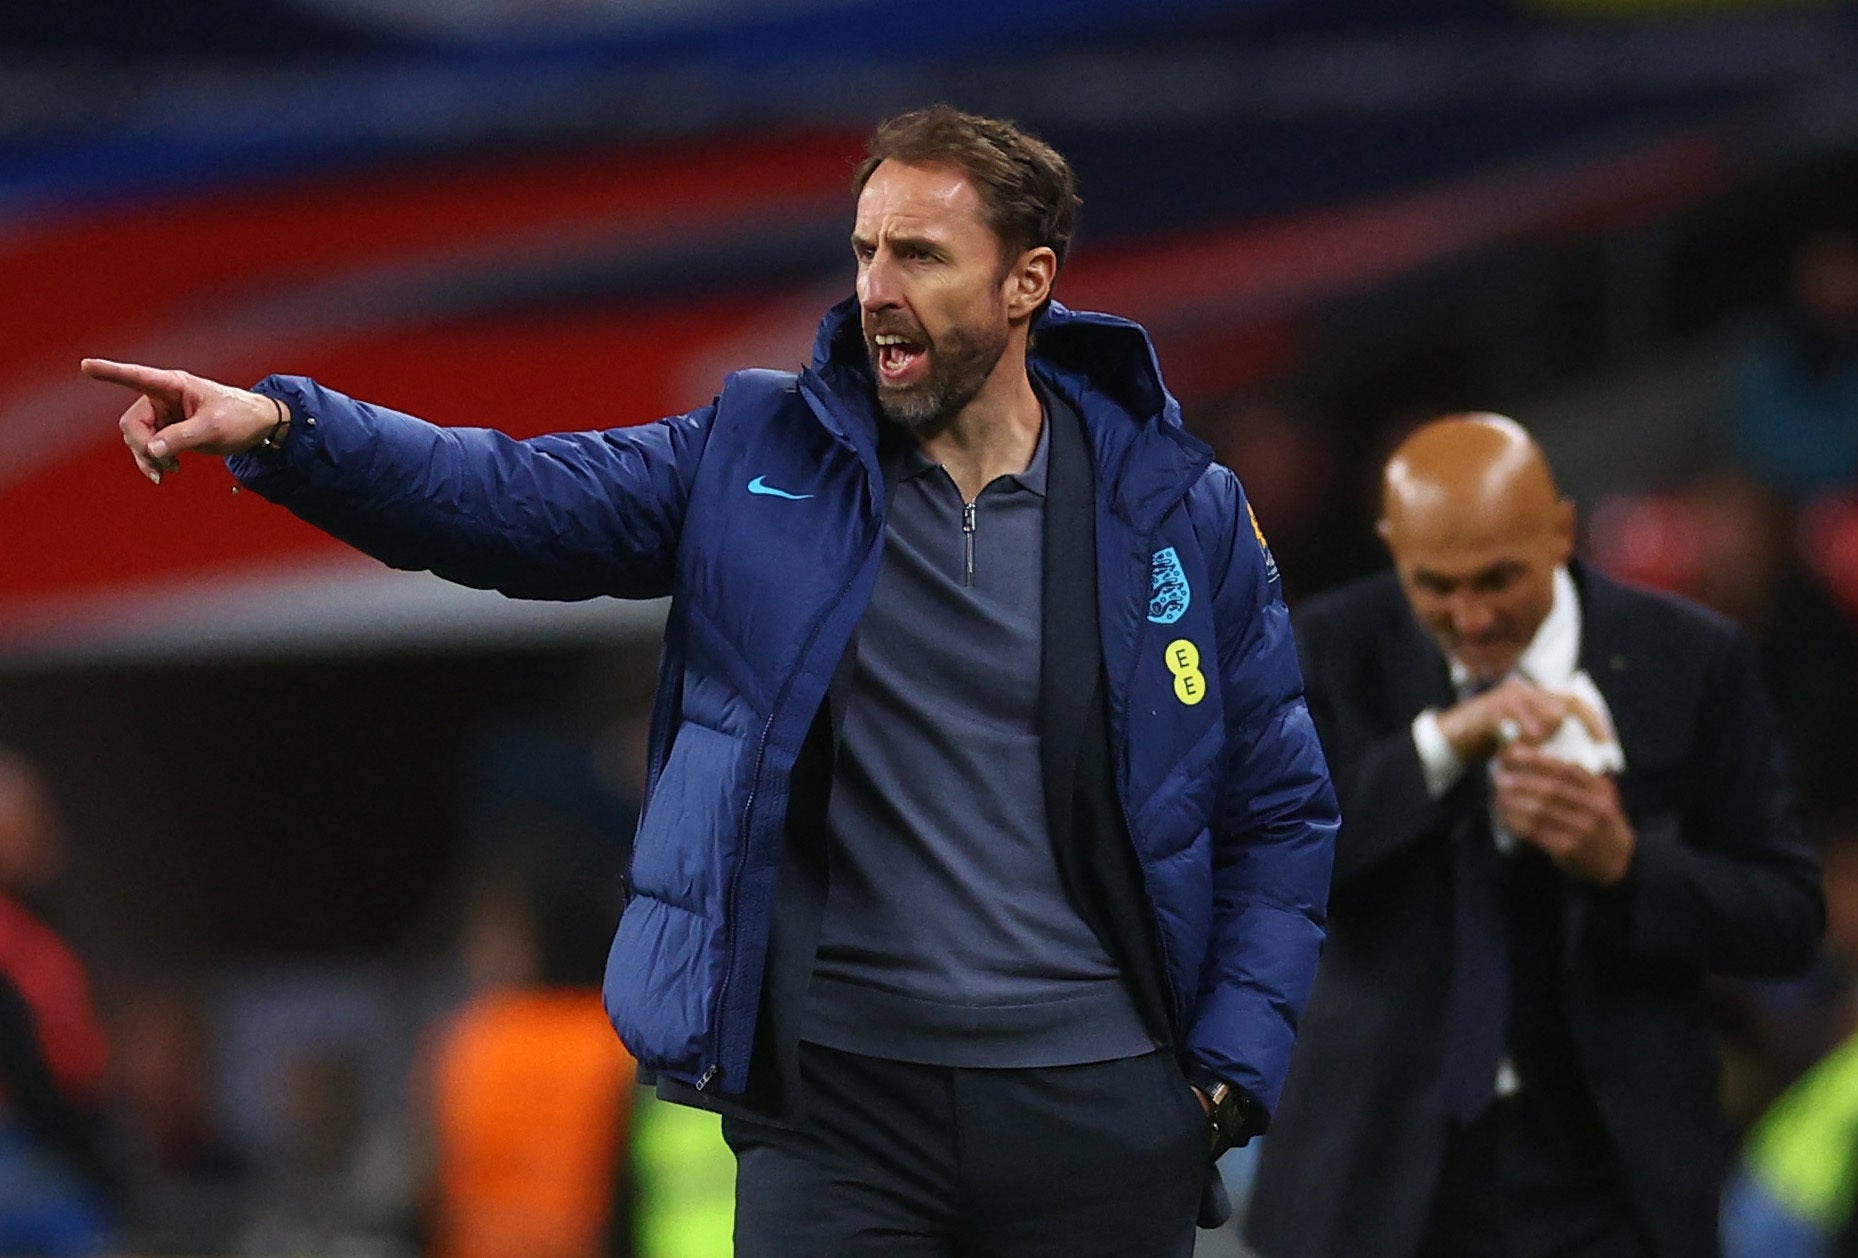 England’s two qualifying wins over Italy make them contenders for Euro 2024, can Gareth Southgate lead them to glory?